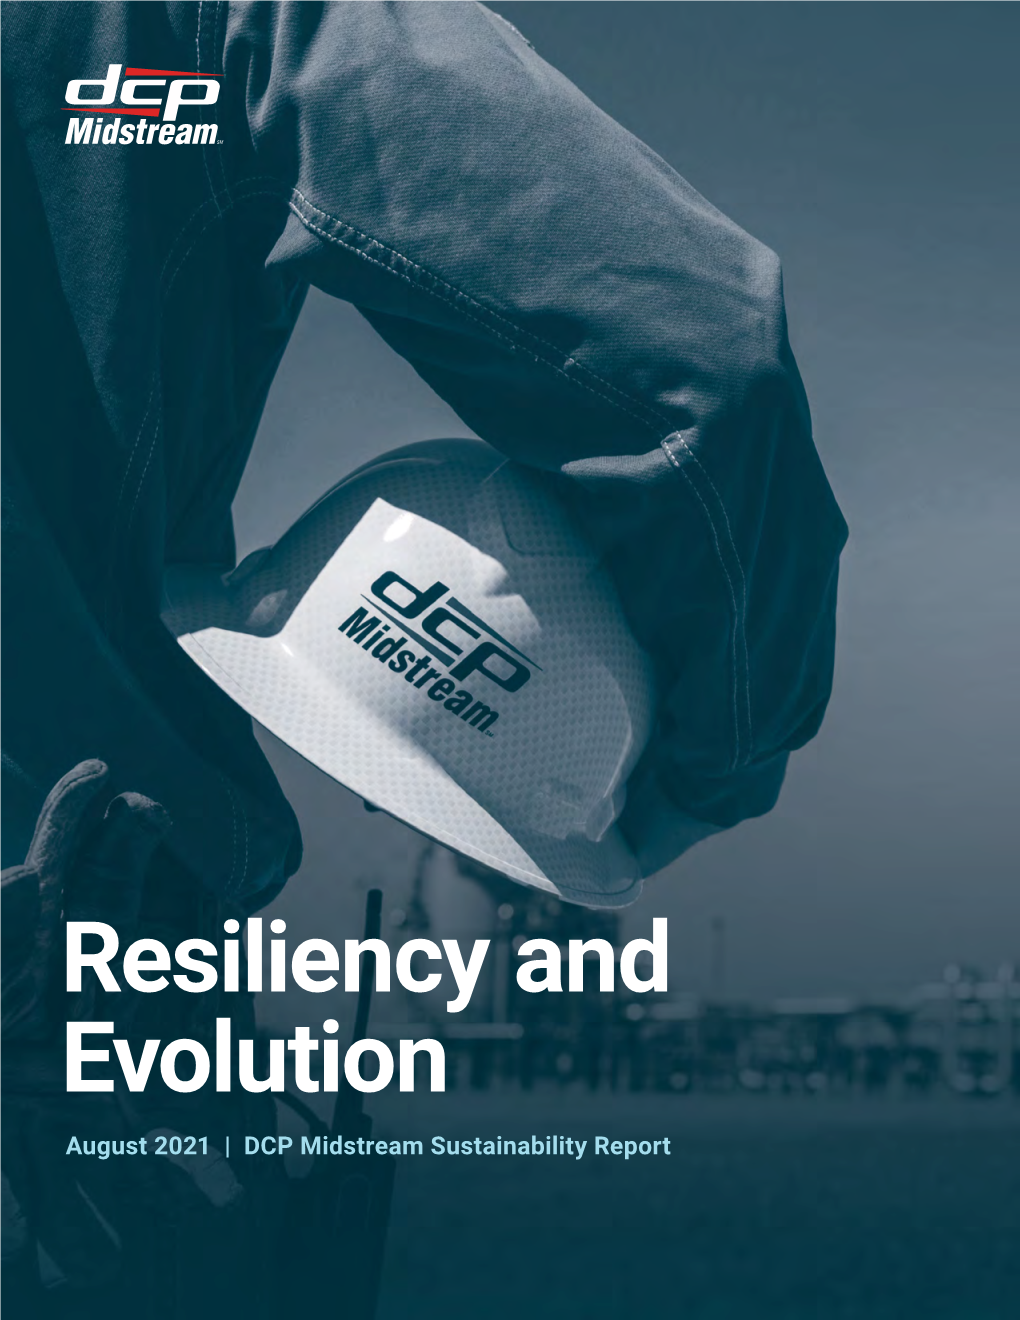 2020 Sustainability Report – Resiliency and Evolution